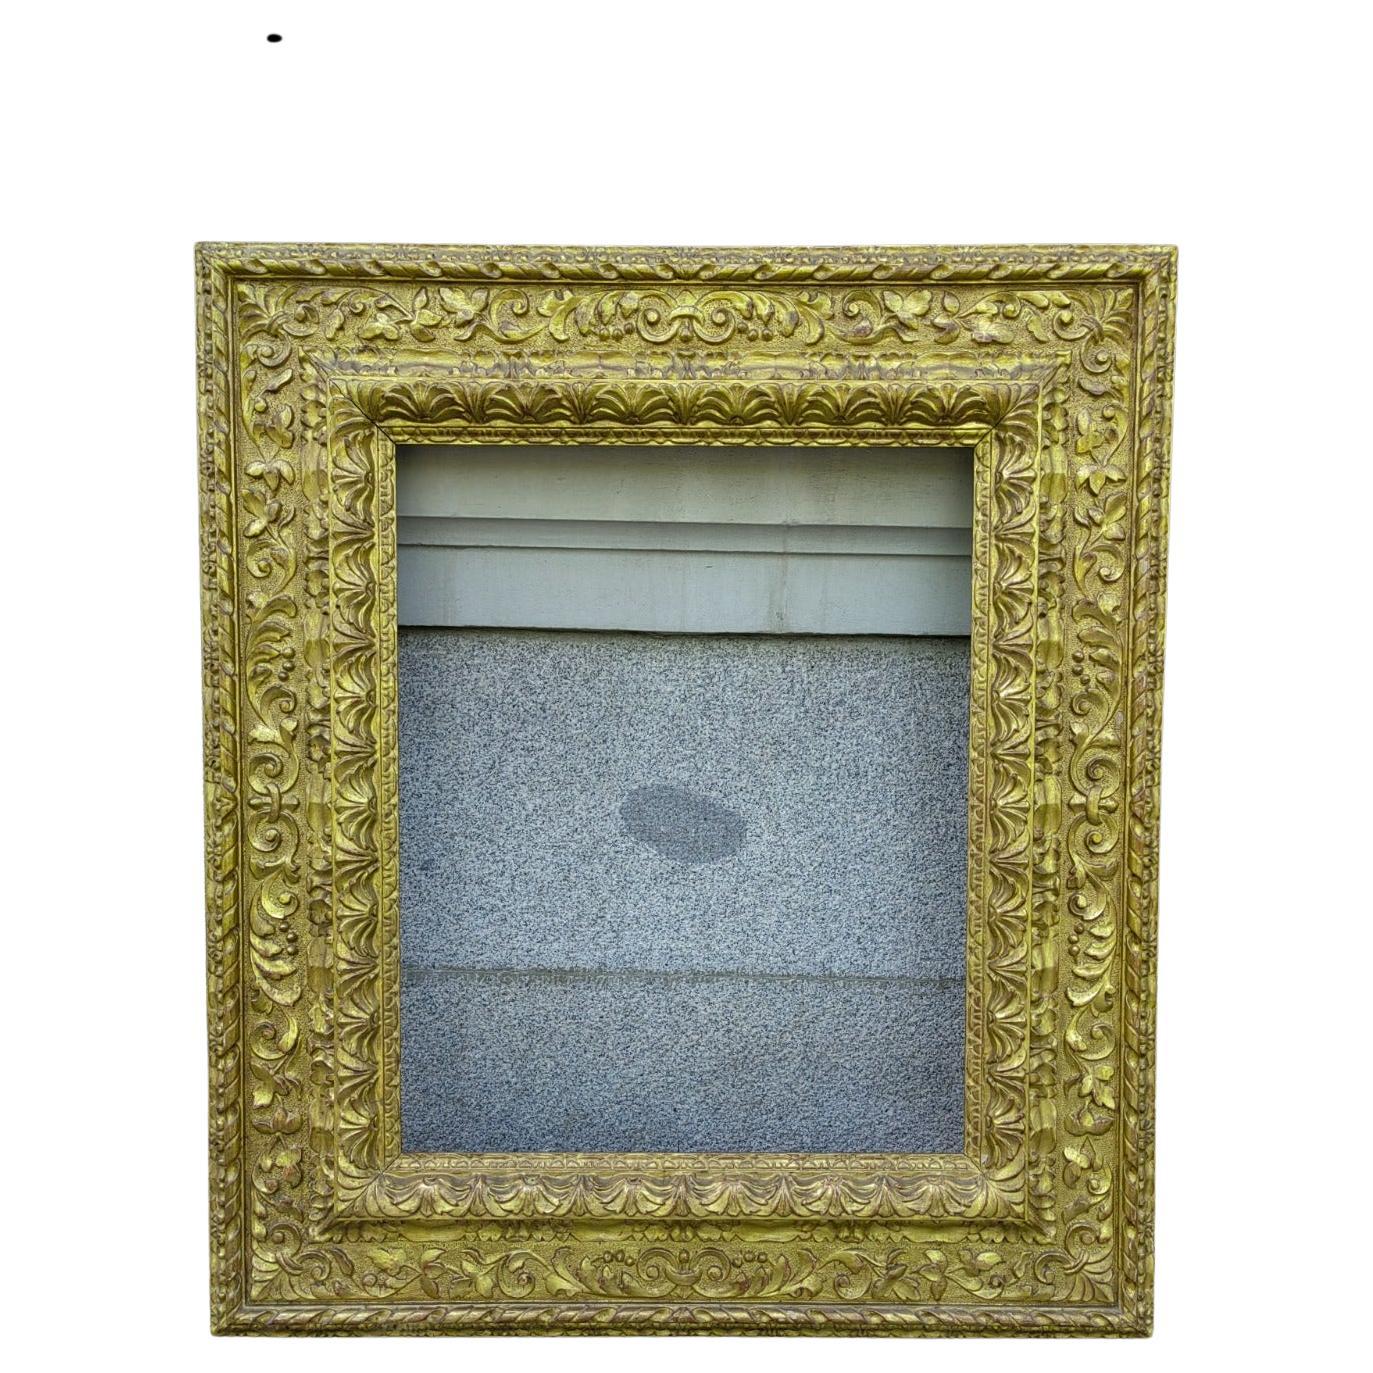 Antique Gold Picture Frame 1-5/8" Polystyrene WholesaleArtsFrame 4317-A-978A 